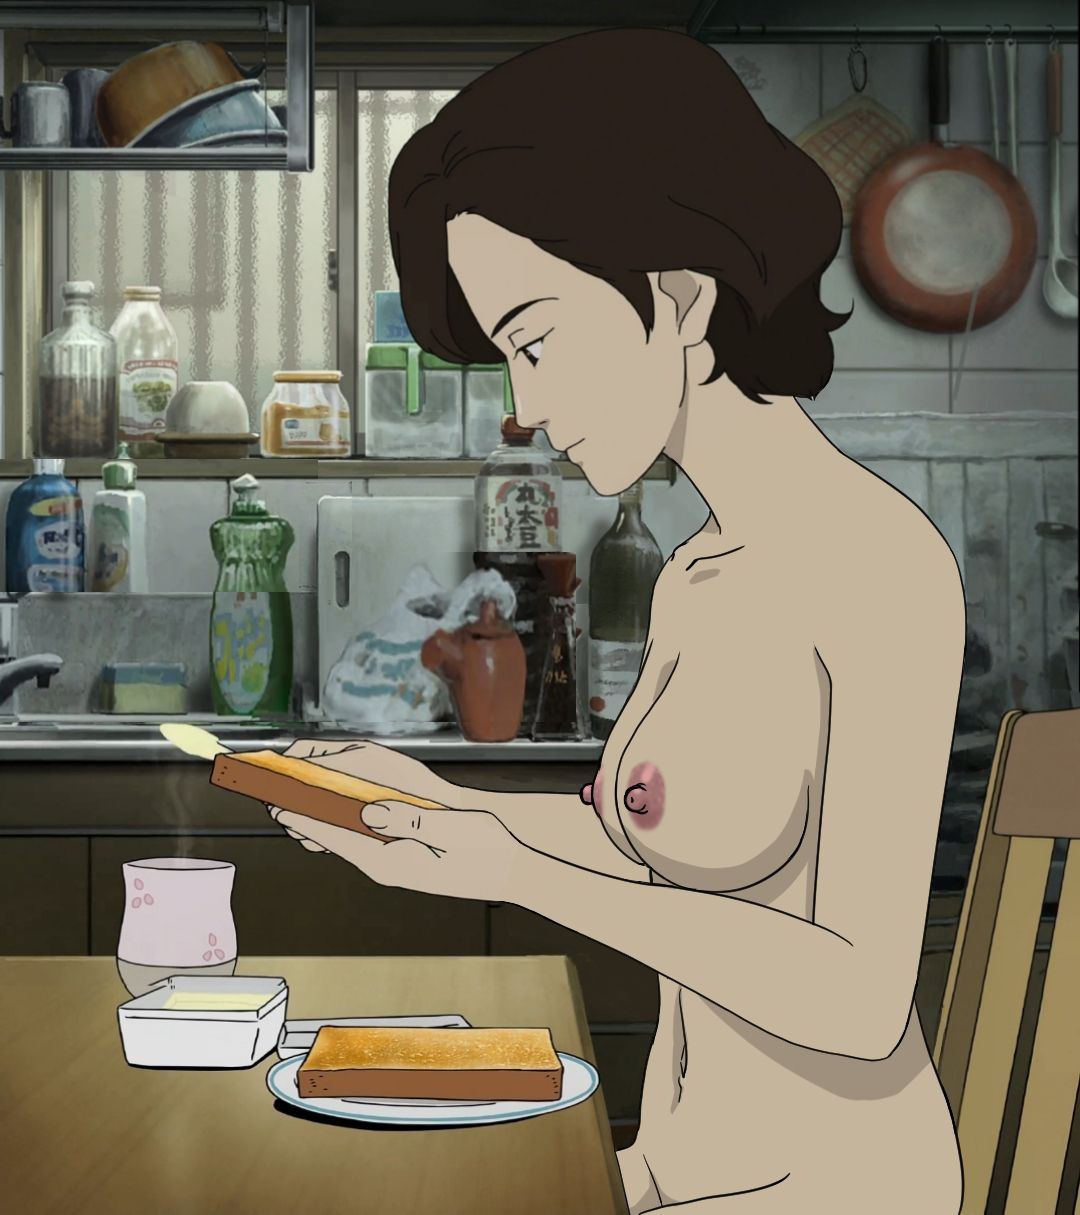 【Peel Korra】 Mass Drop of Stripped Kora Images of Official Anime Drawings Part 526 11